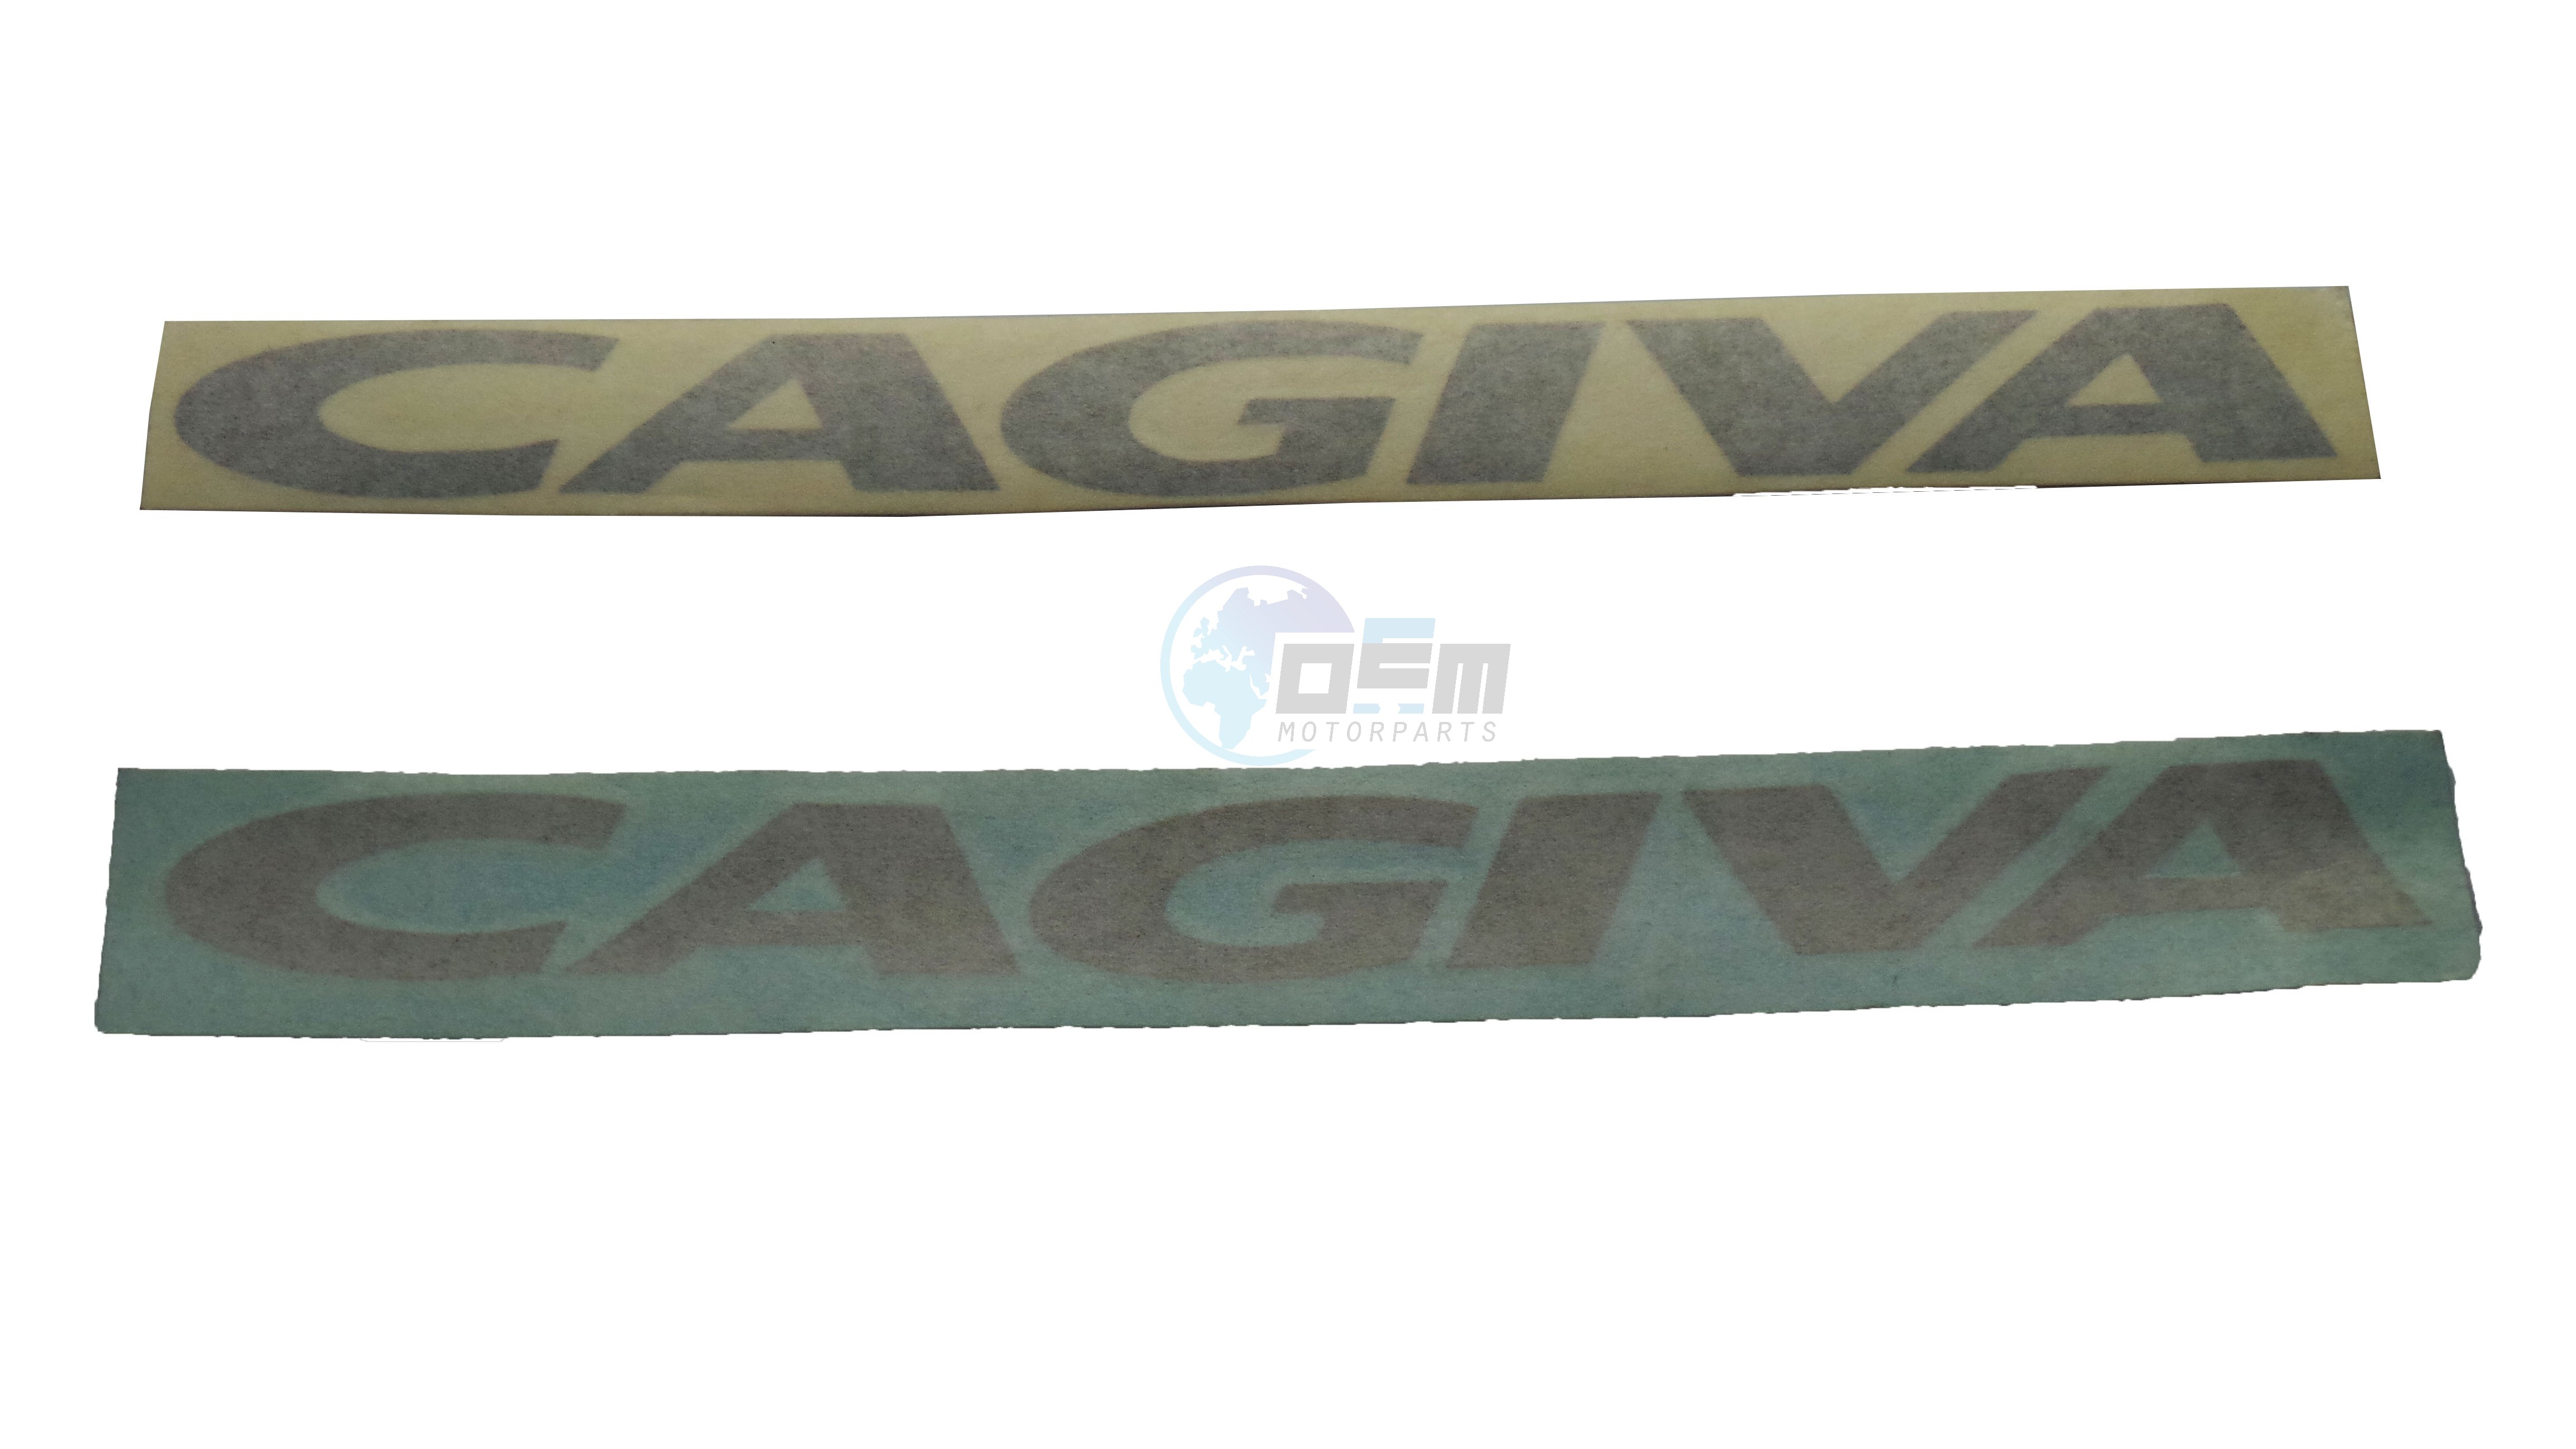 Product image: Cagiva - 80A095787 - DECAL CAGIVA  Parts can be in primer only  0